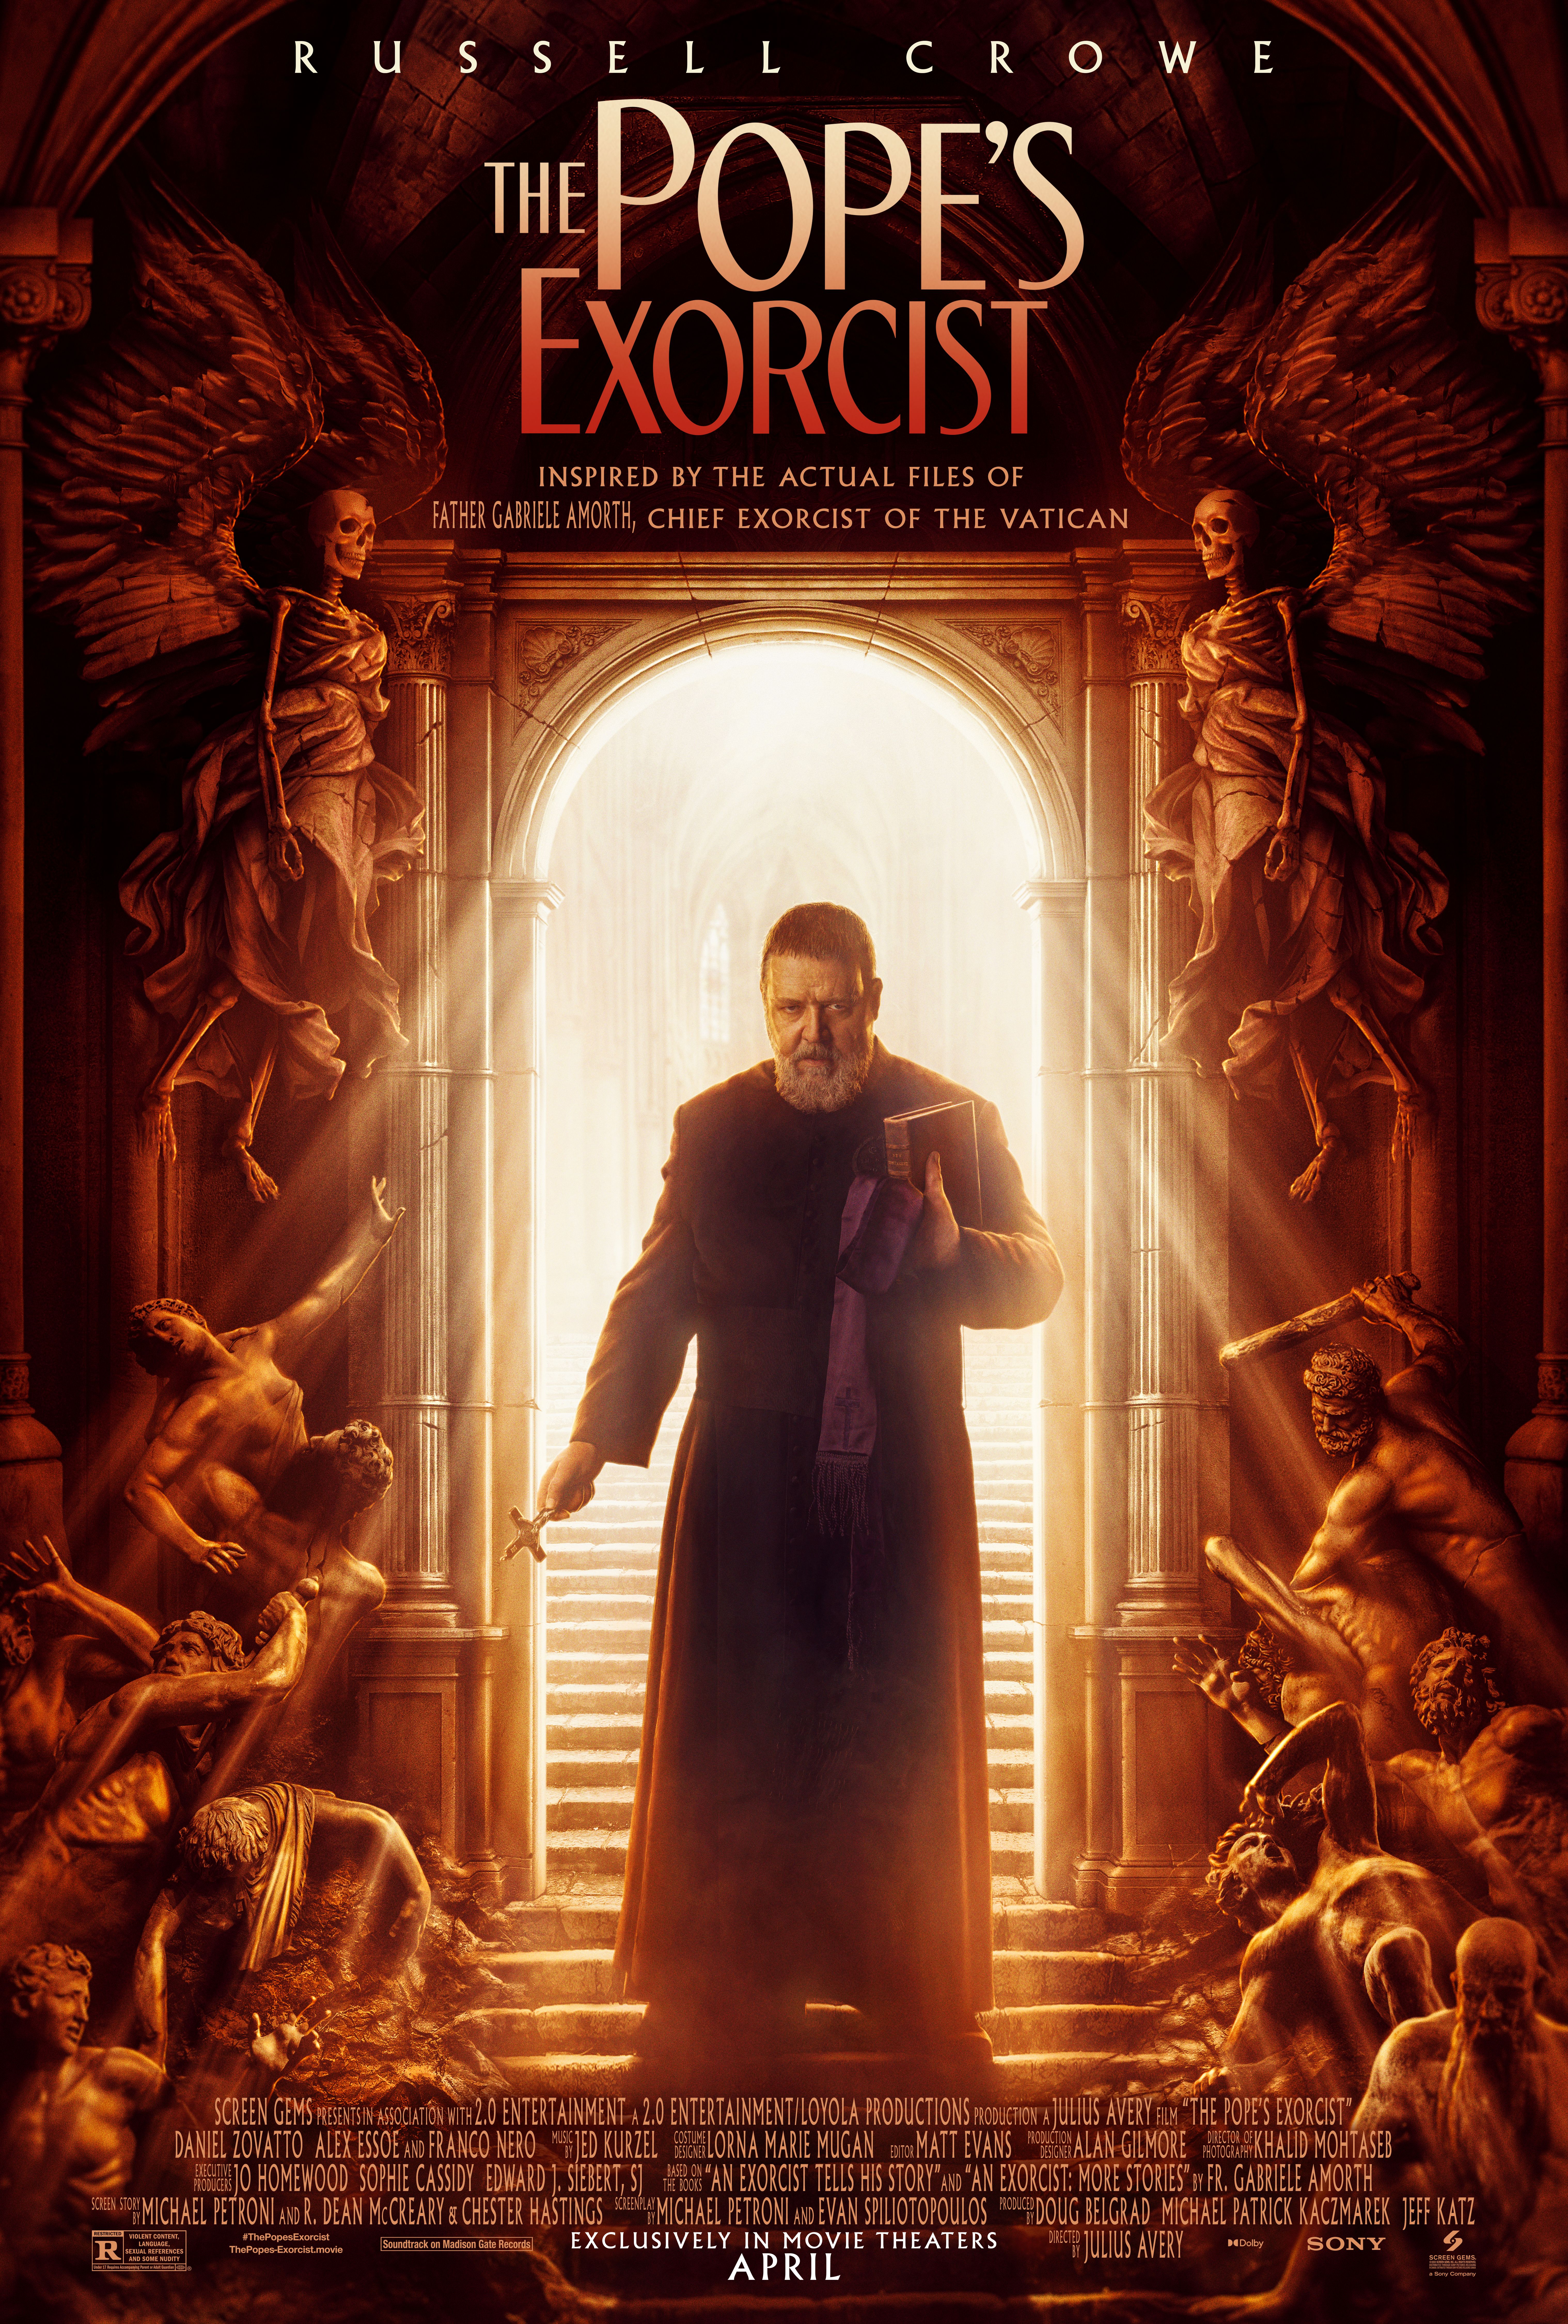 Russell Crowe in the poster for The Pope's Exorcist